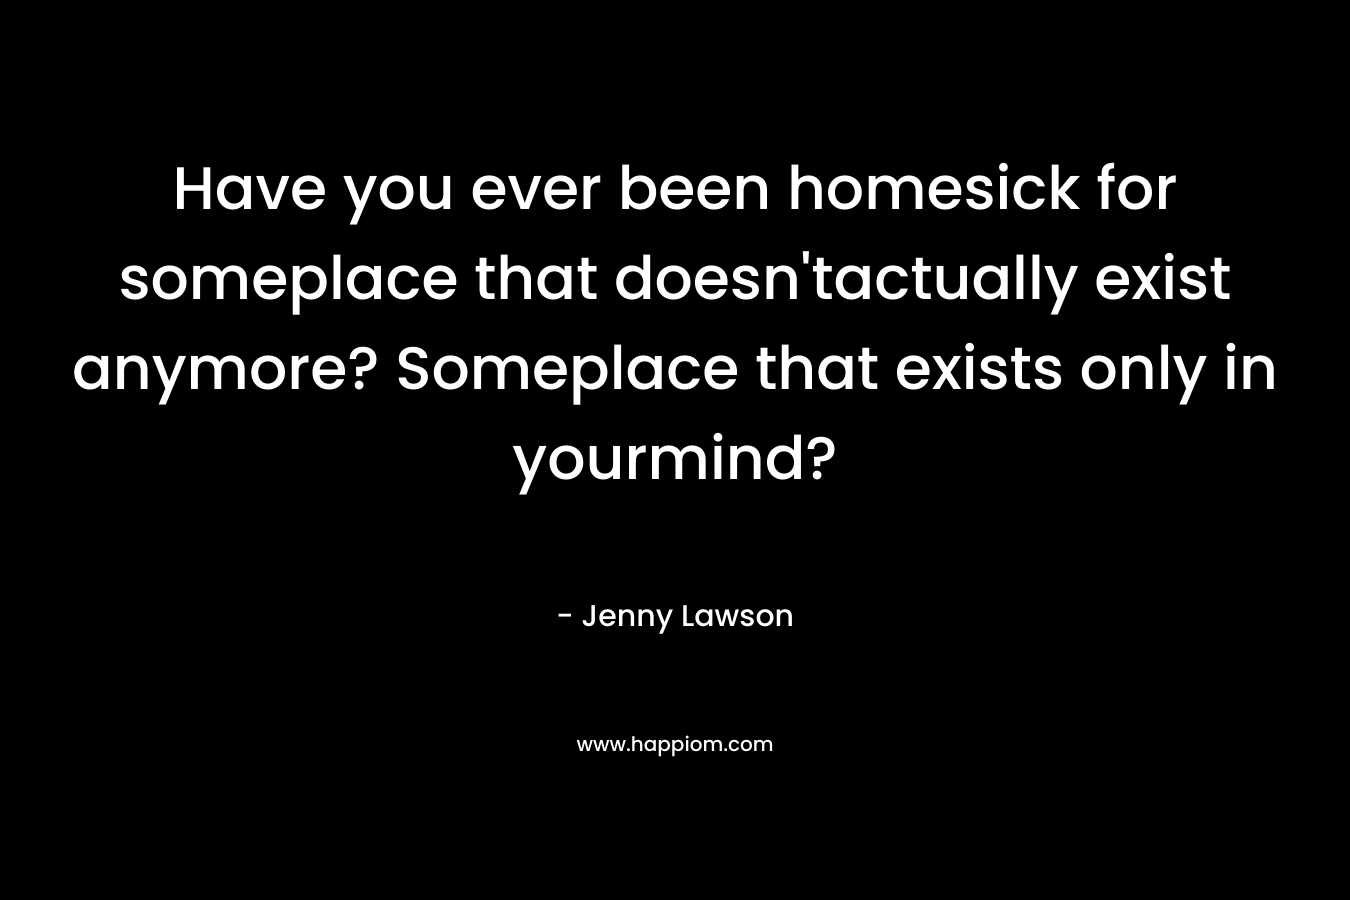 Have you ever been homesick for someplace that doesn'tactually exist anymore? Someplace that exists only in yourmind?